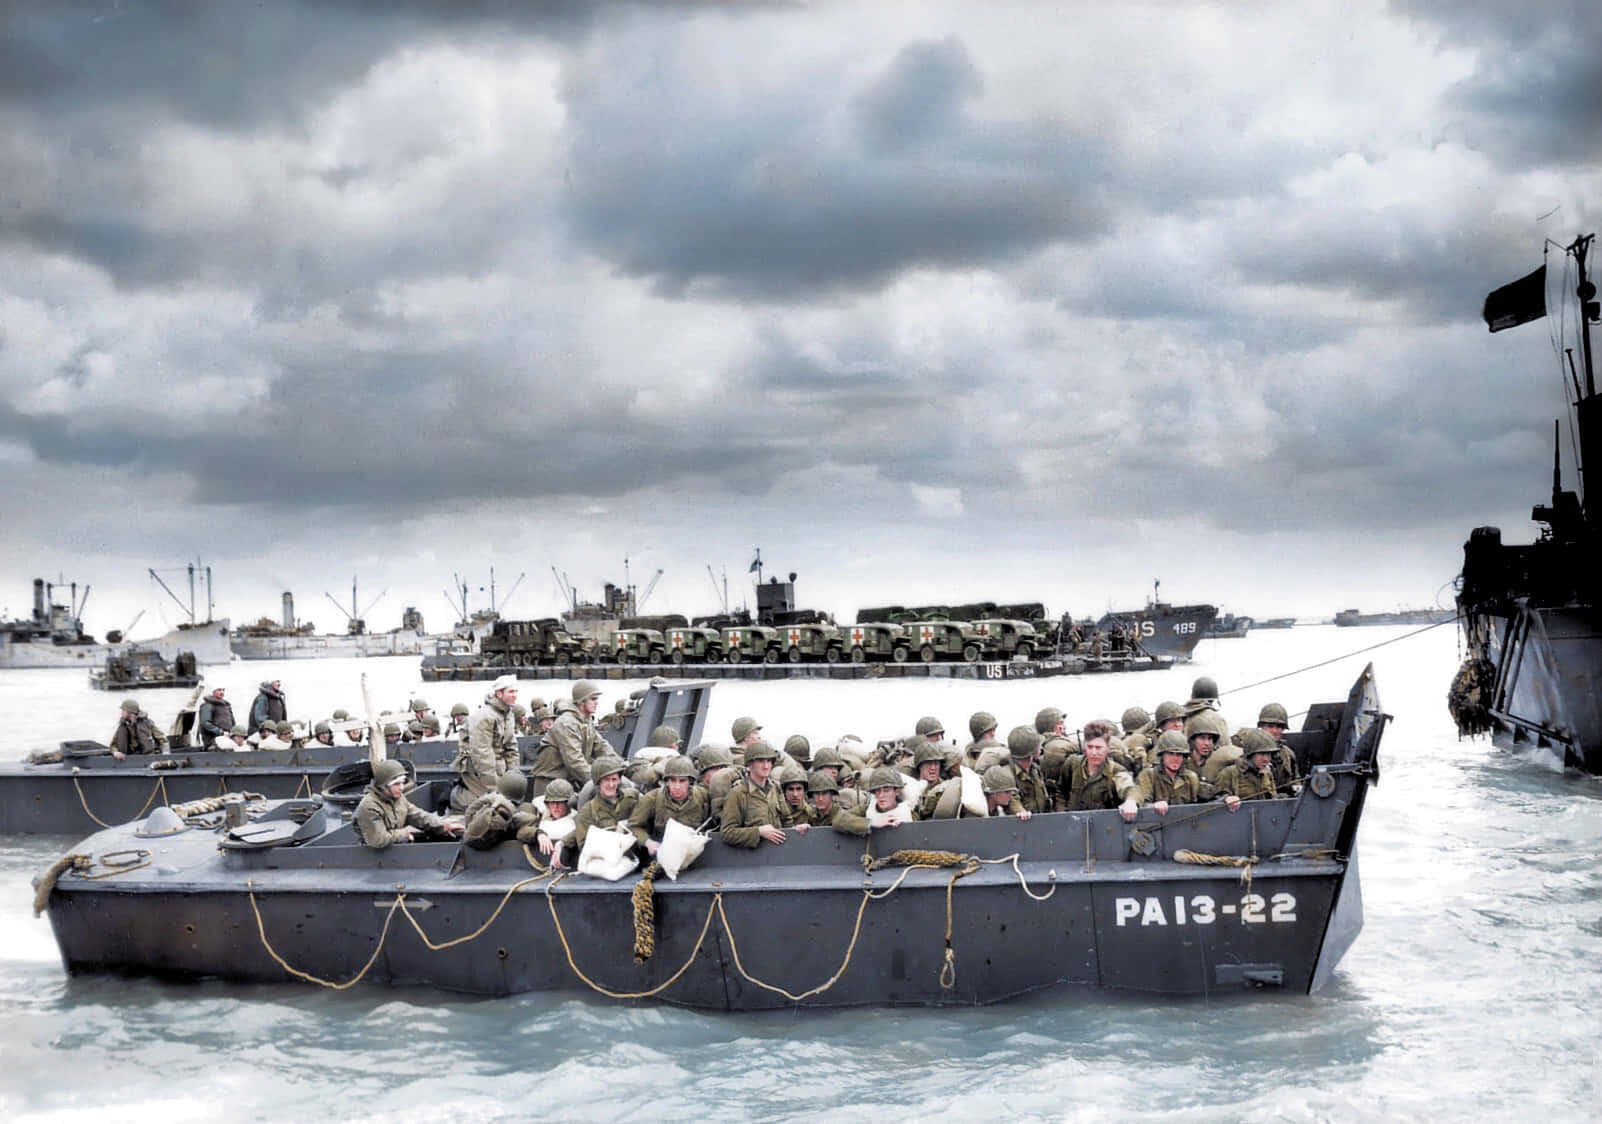 A Group Of Soldiers On Boats In The Water